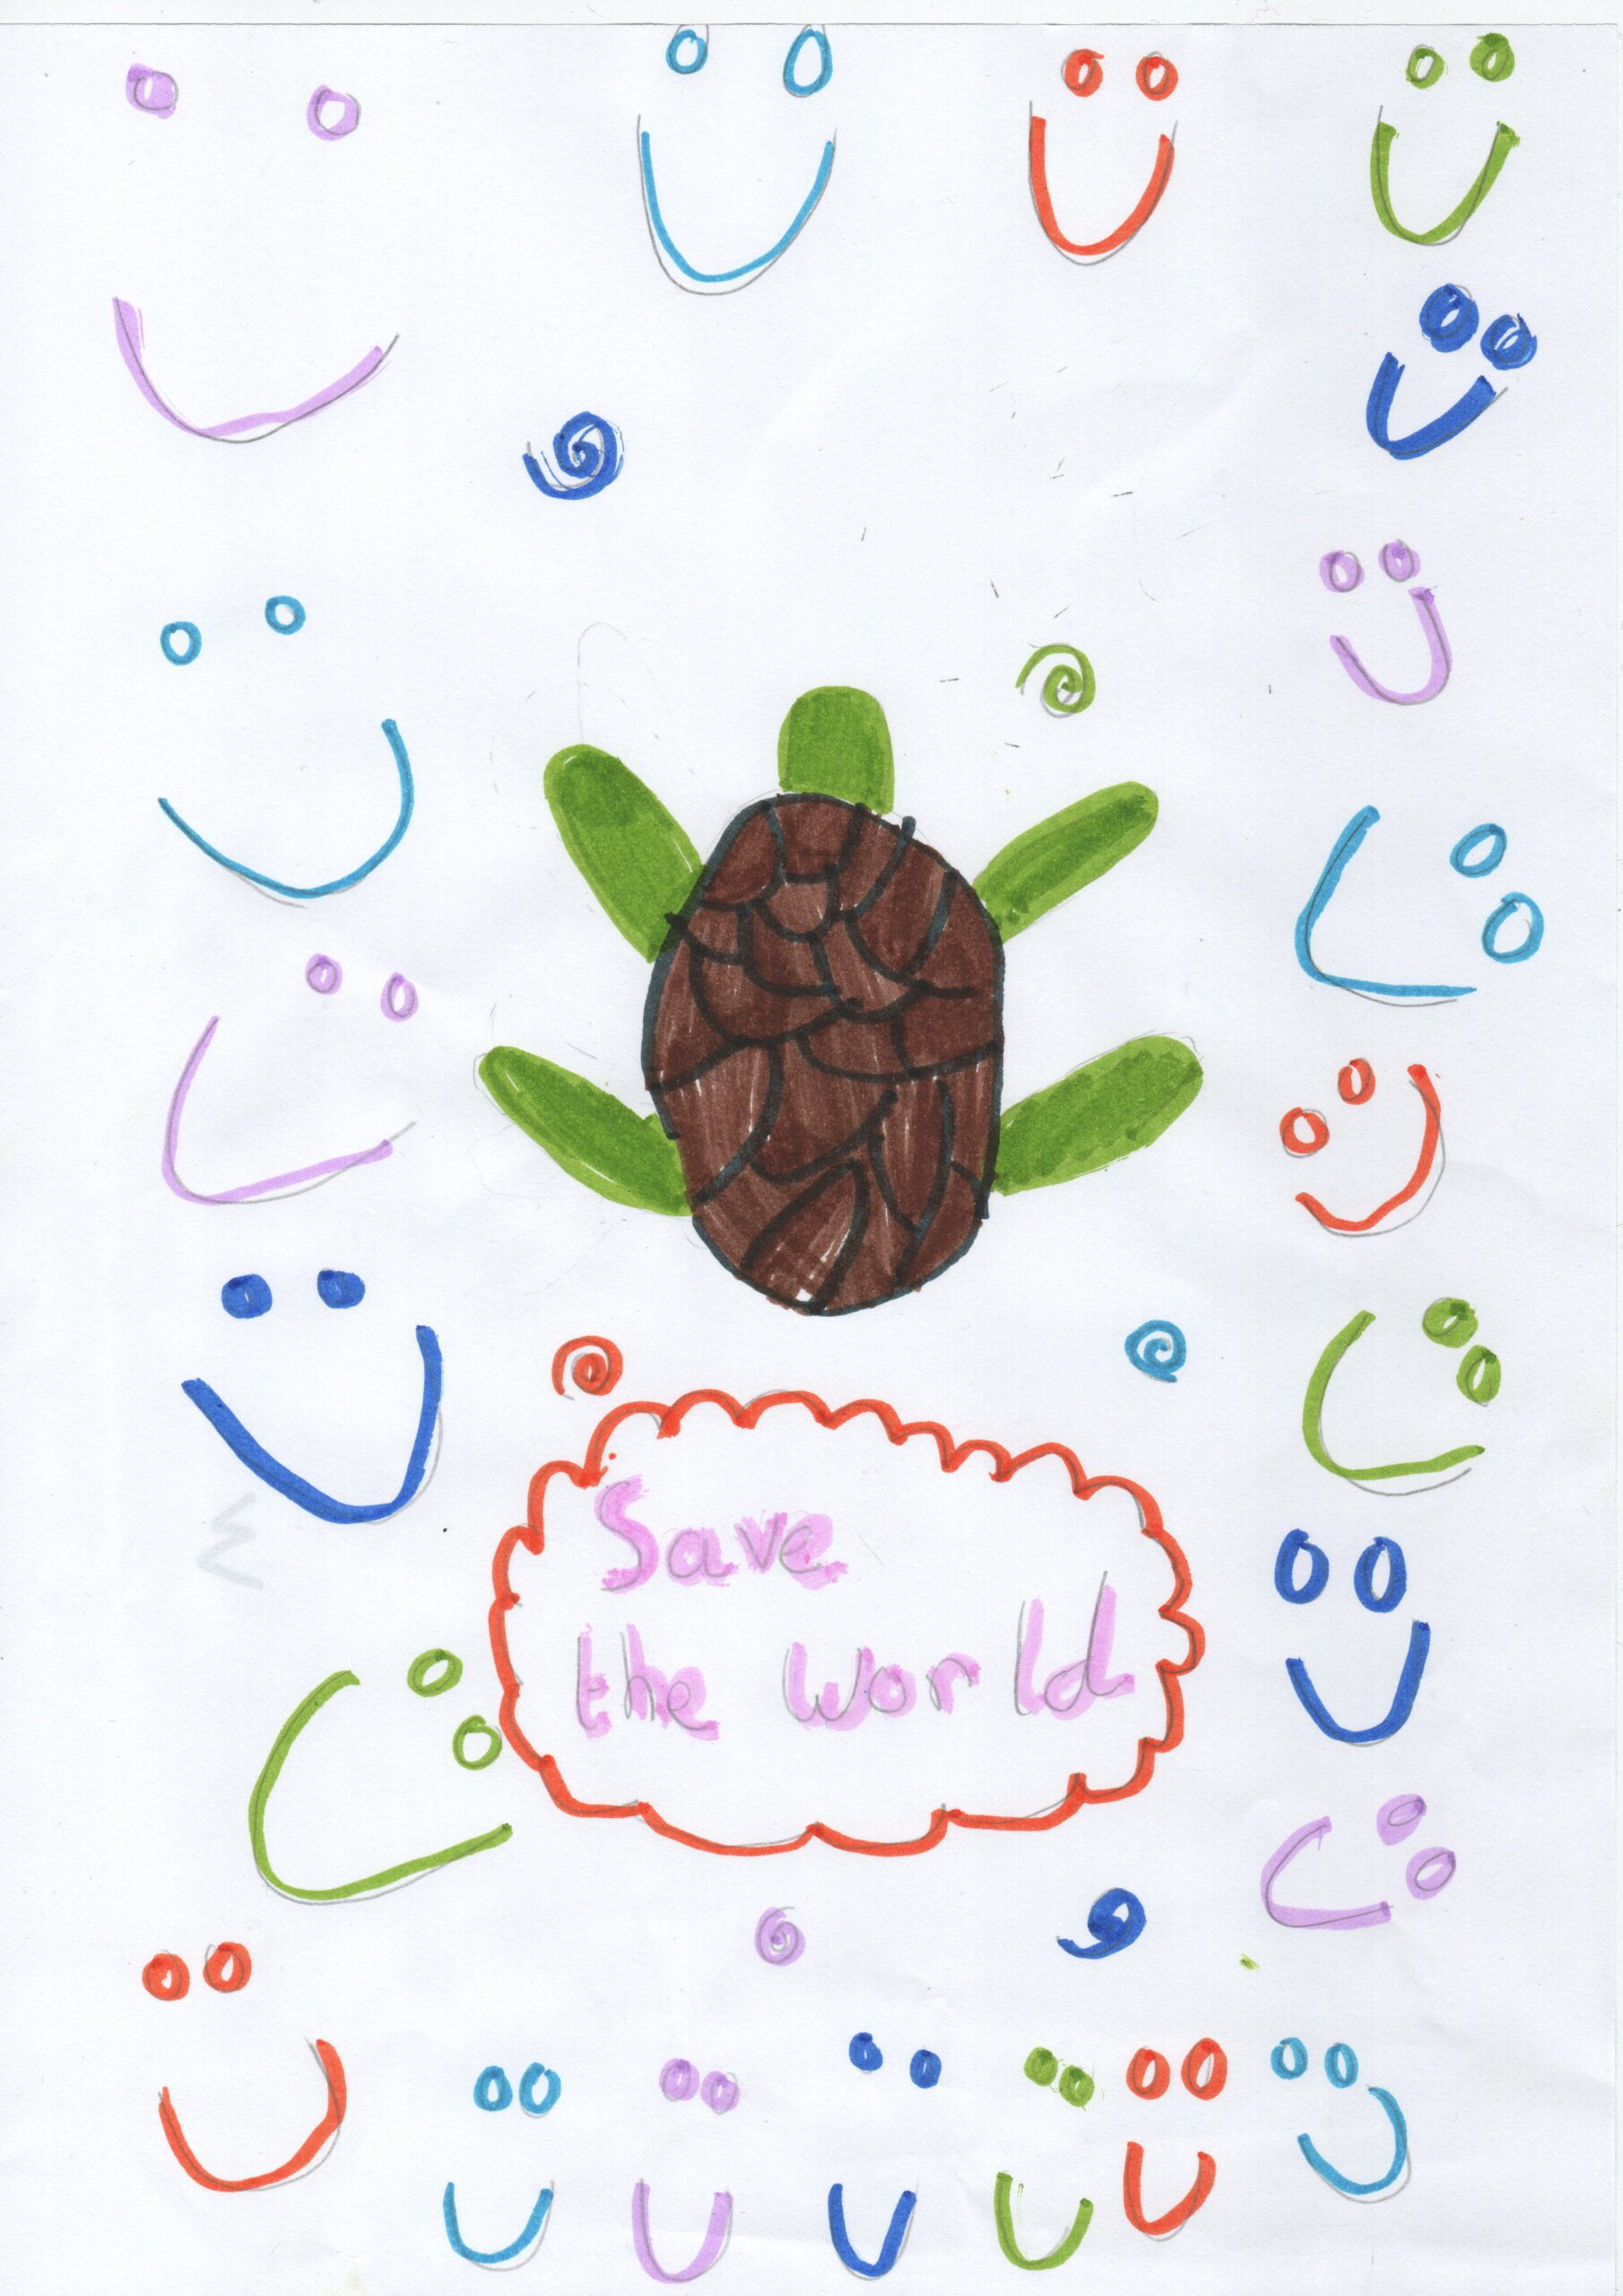 Child’s drawing with a green turtle drawn in the middle of the design with different coloured smiley facings surrounding it and a slogan reading ‘save the world’